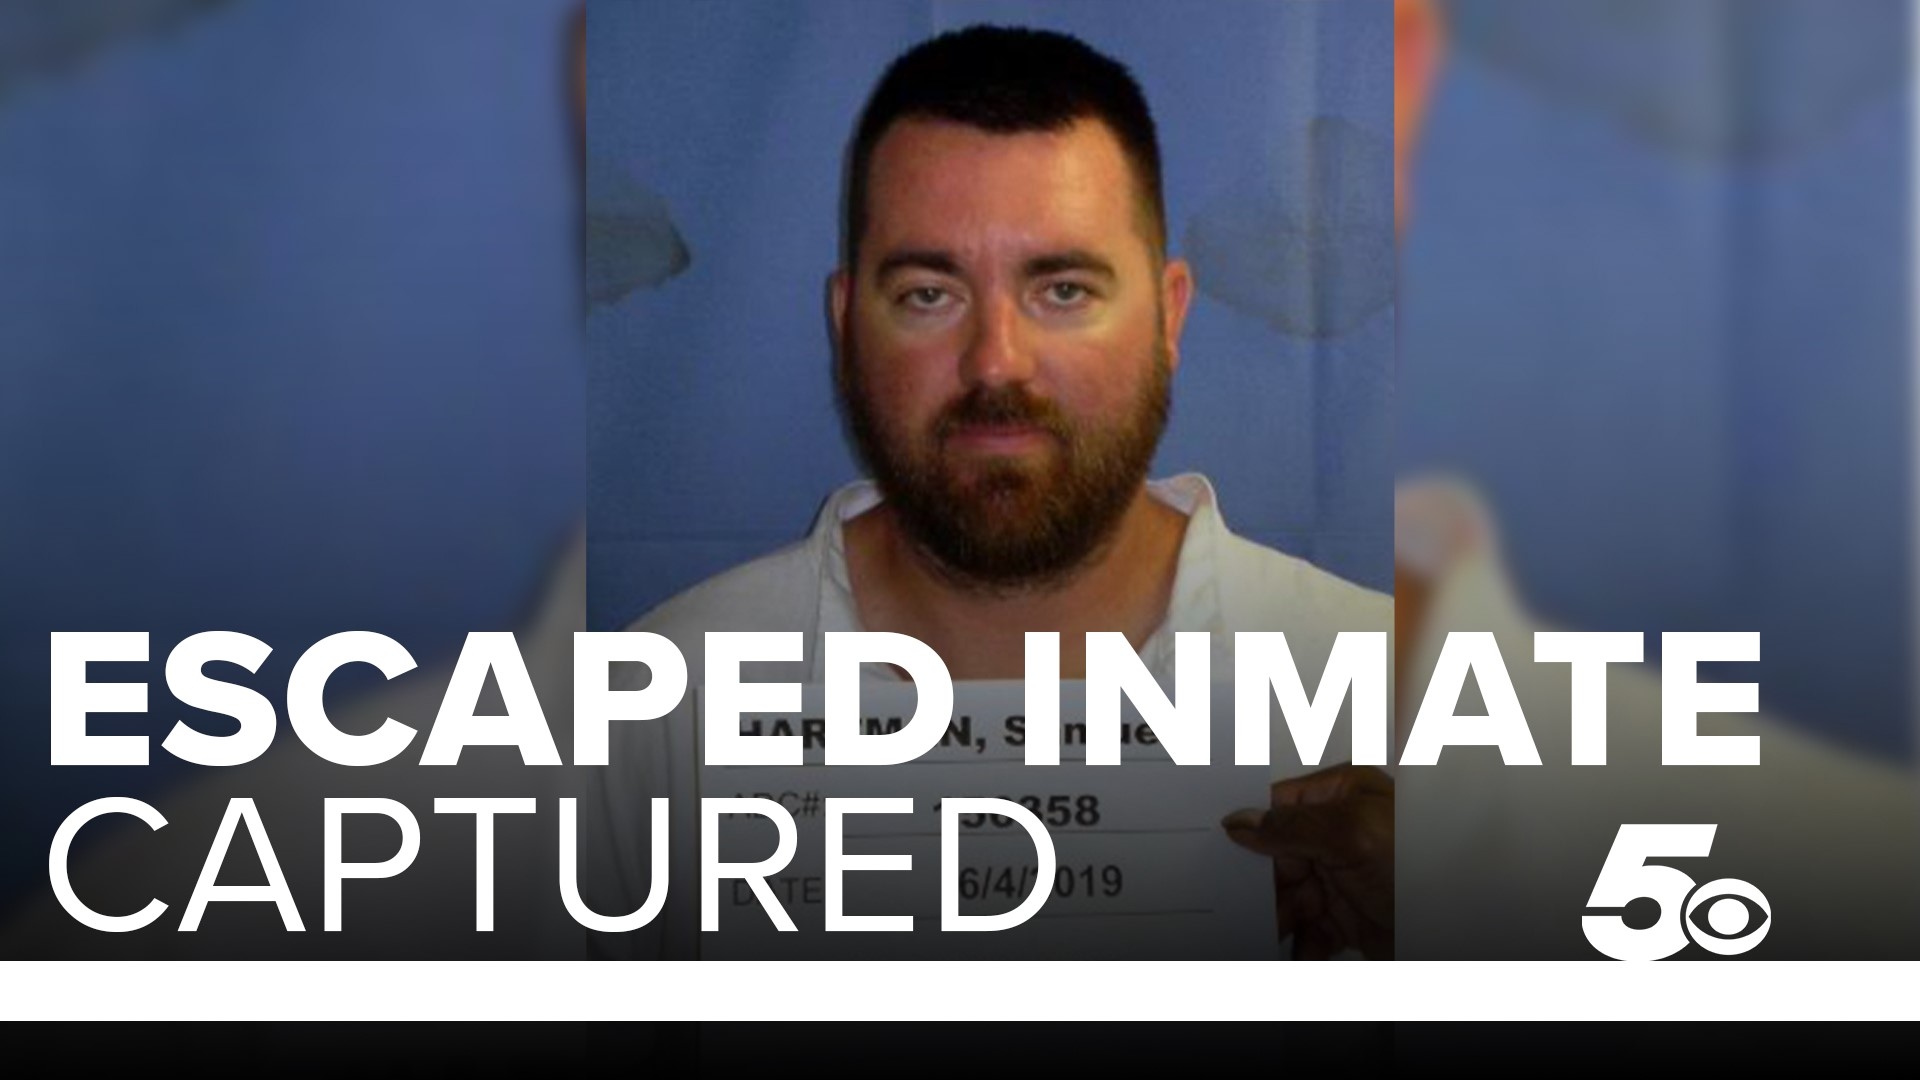 Hartman was sentenced to life in prison for raping his 14-year-old stepdaughter and had been incarcerated since 2013.